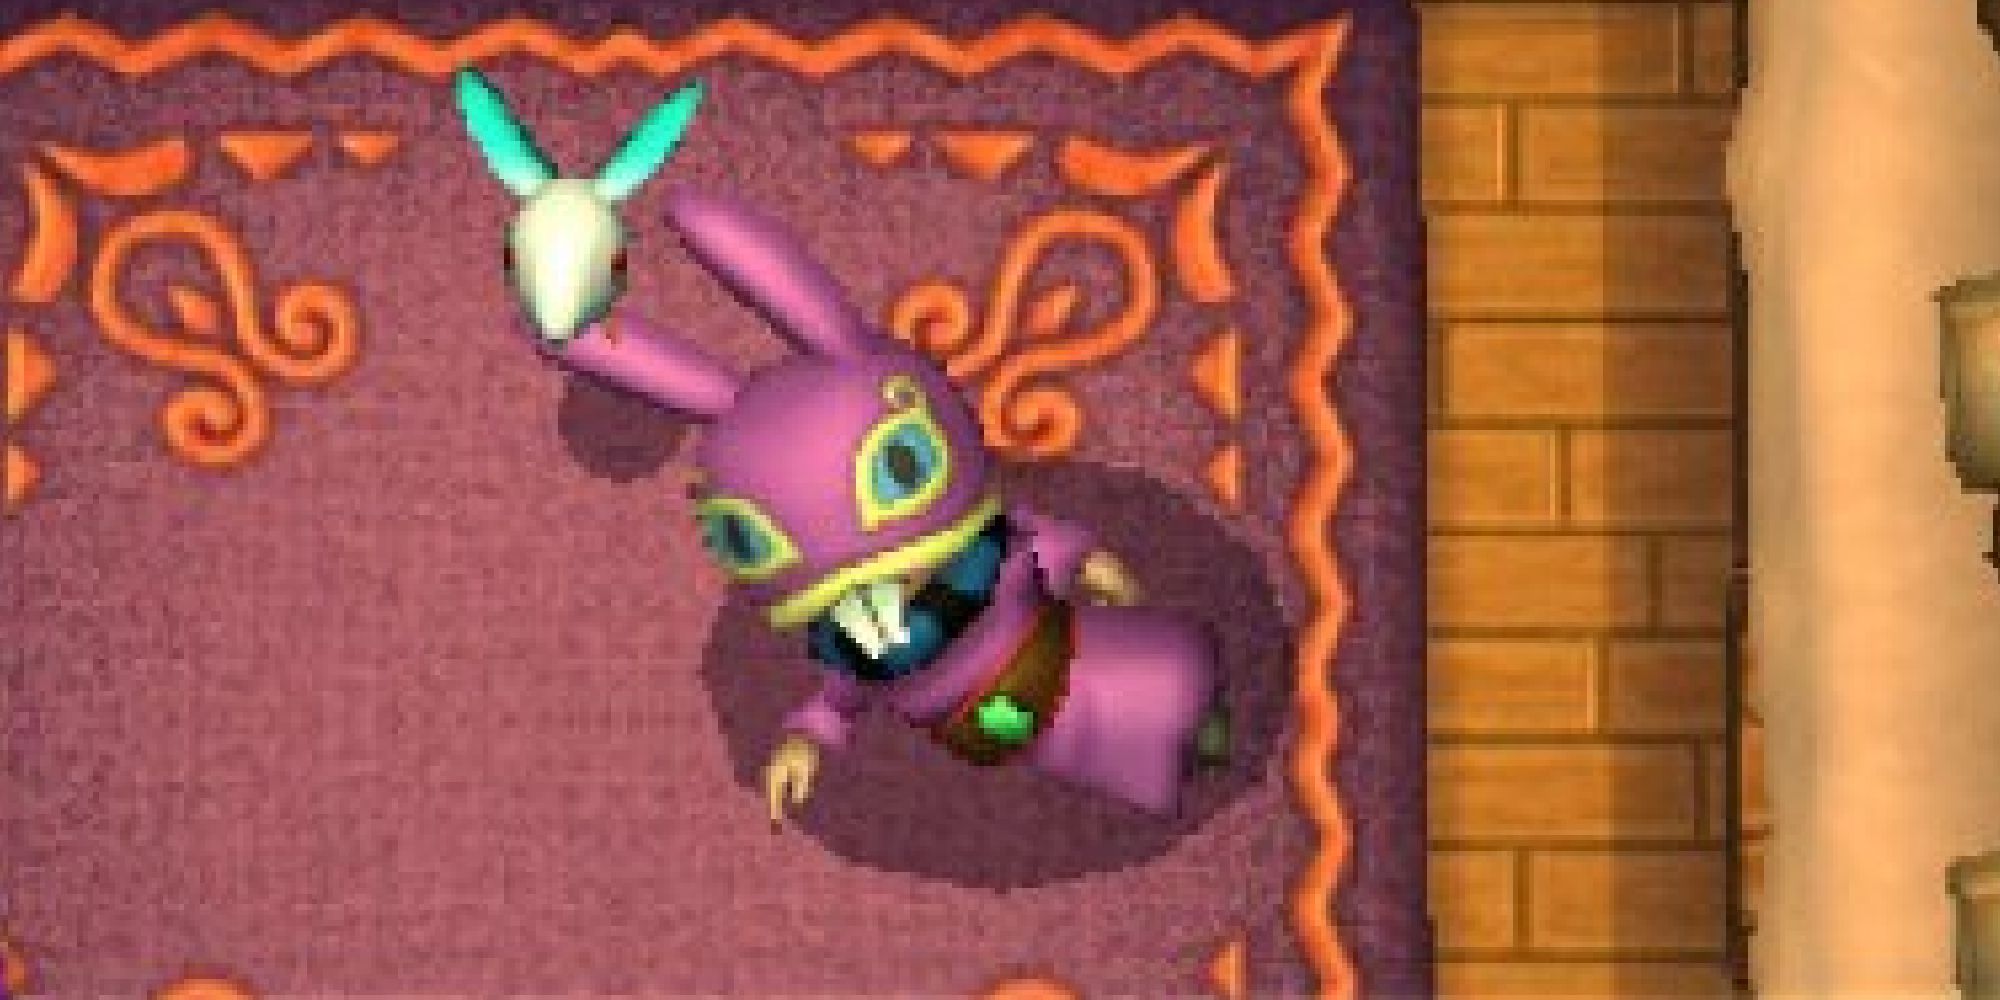 Ravio lounging on Link's floor in A Link Between Worlds